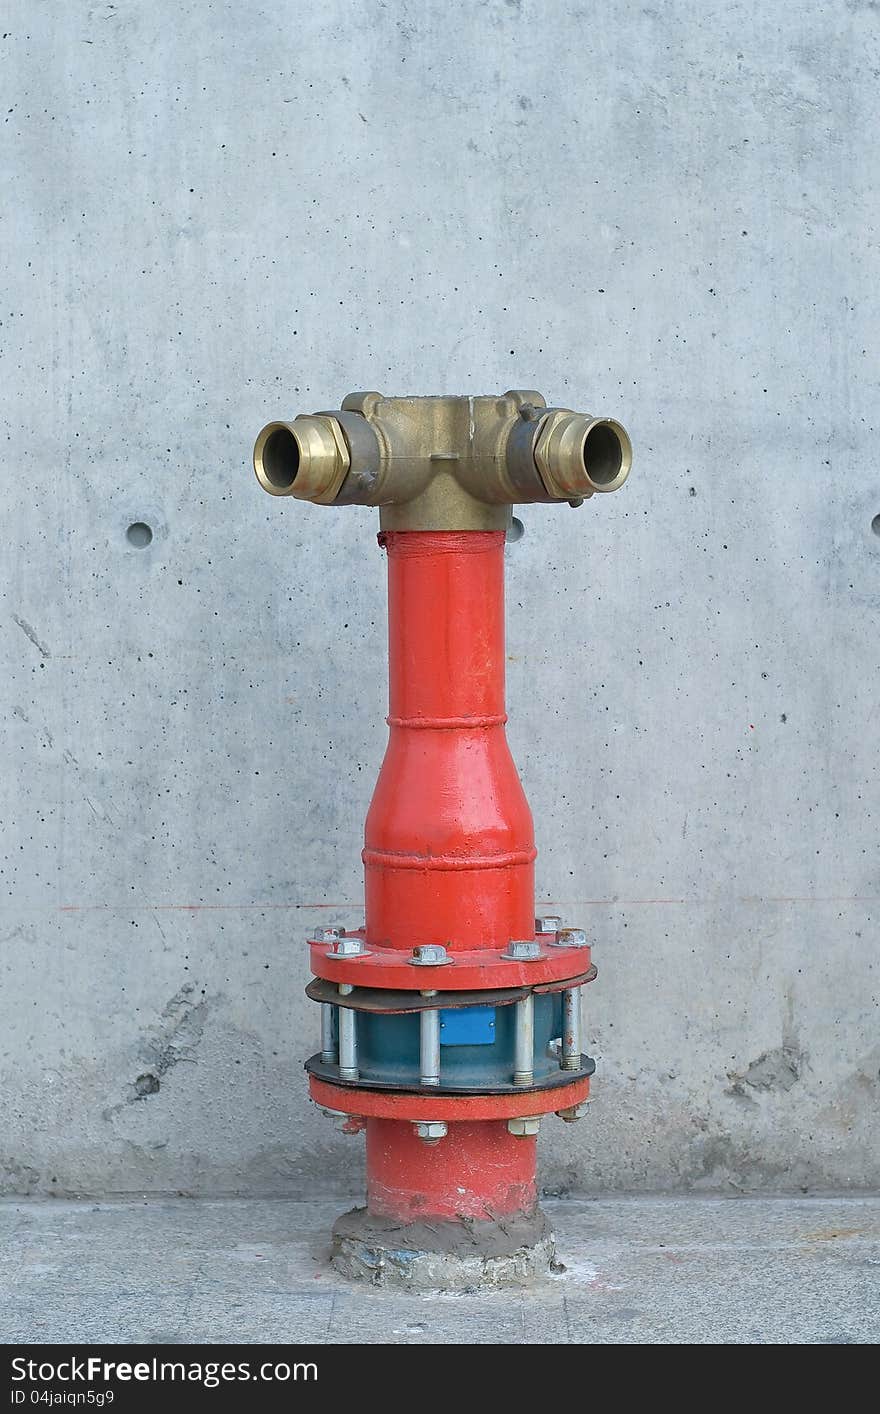 Fire manifold for fire fighting near building